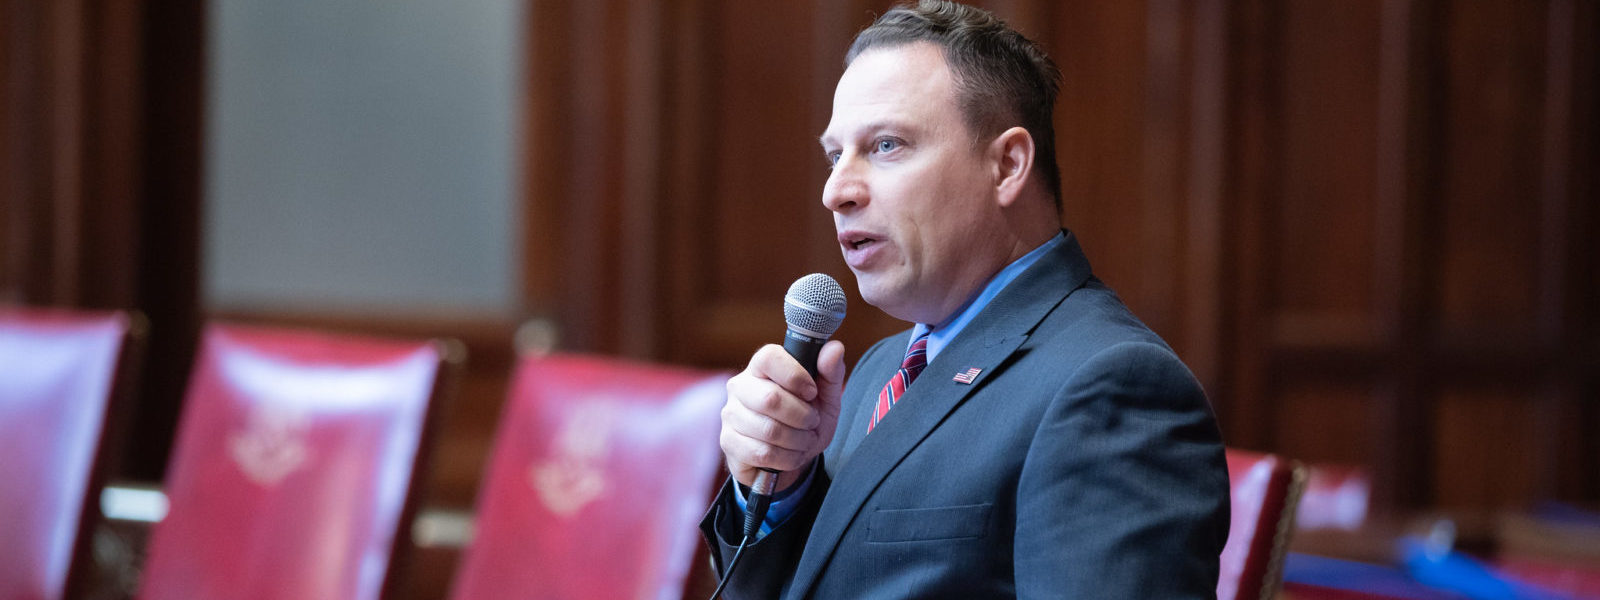 SEN. SAMPSON RATED BY CPAC AS LEADING CONSERVATIVE CT LAWMAKER